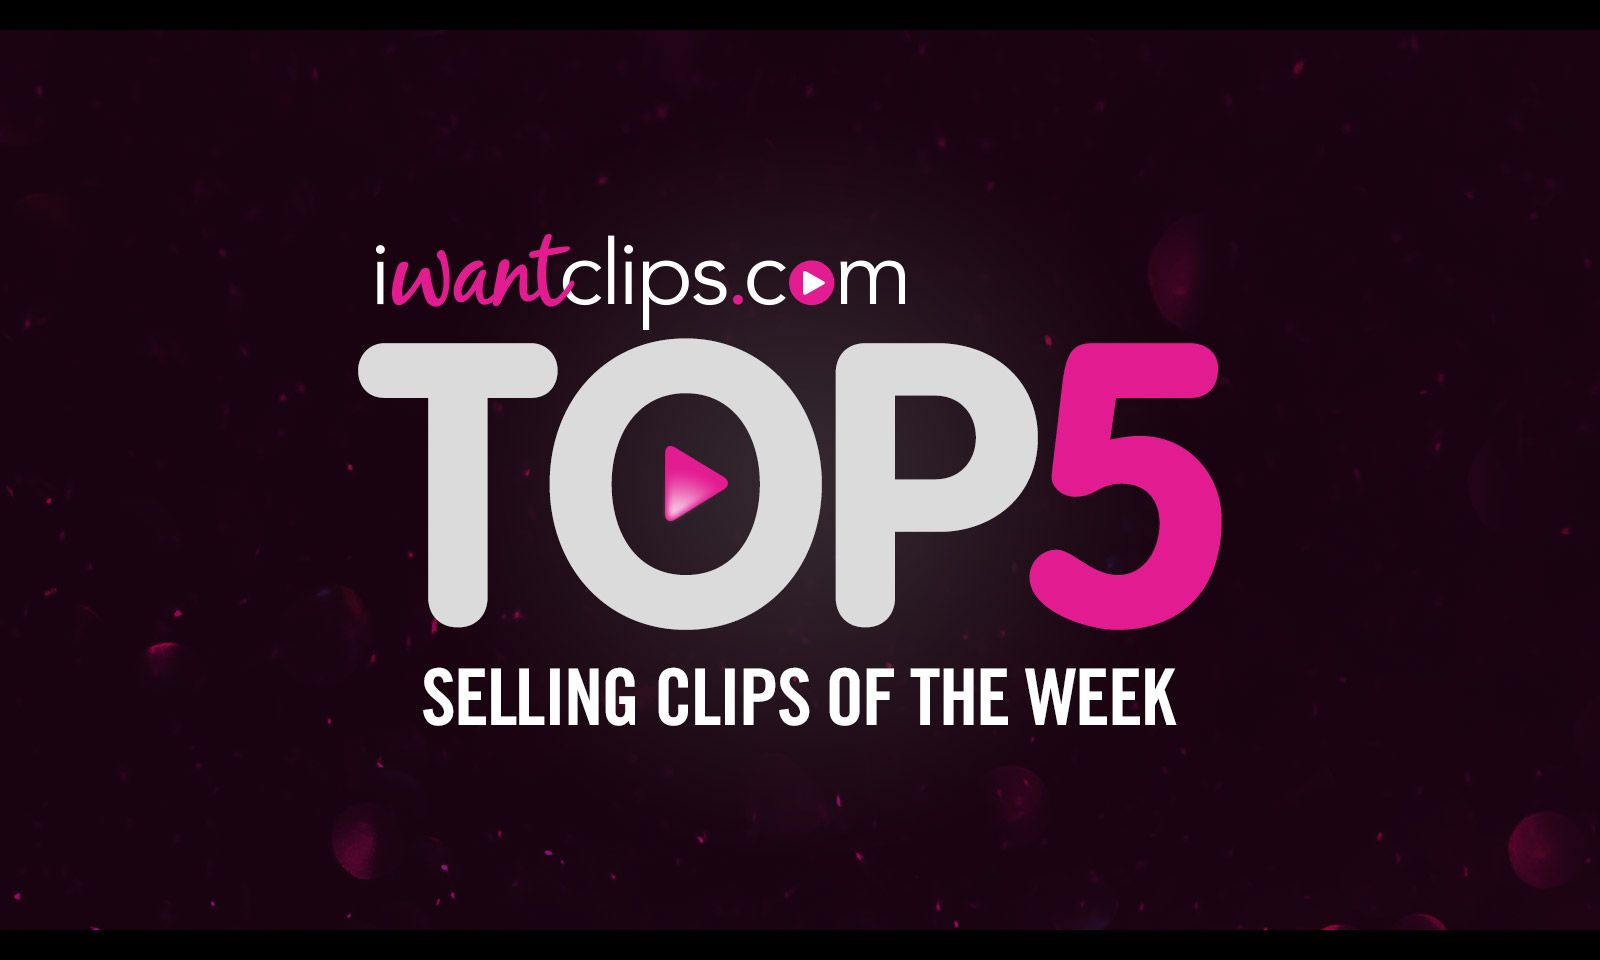 Once Again, Findom Themes Top iWantClips’ Top 5 Clips Of The Week